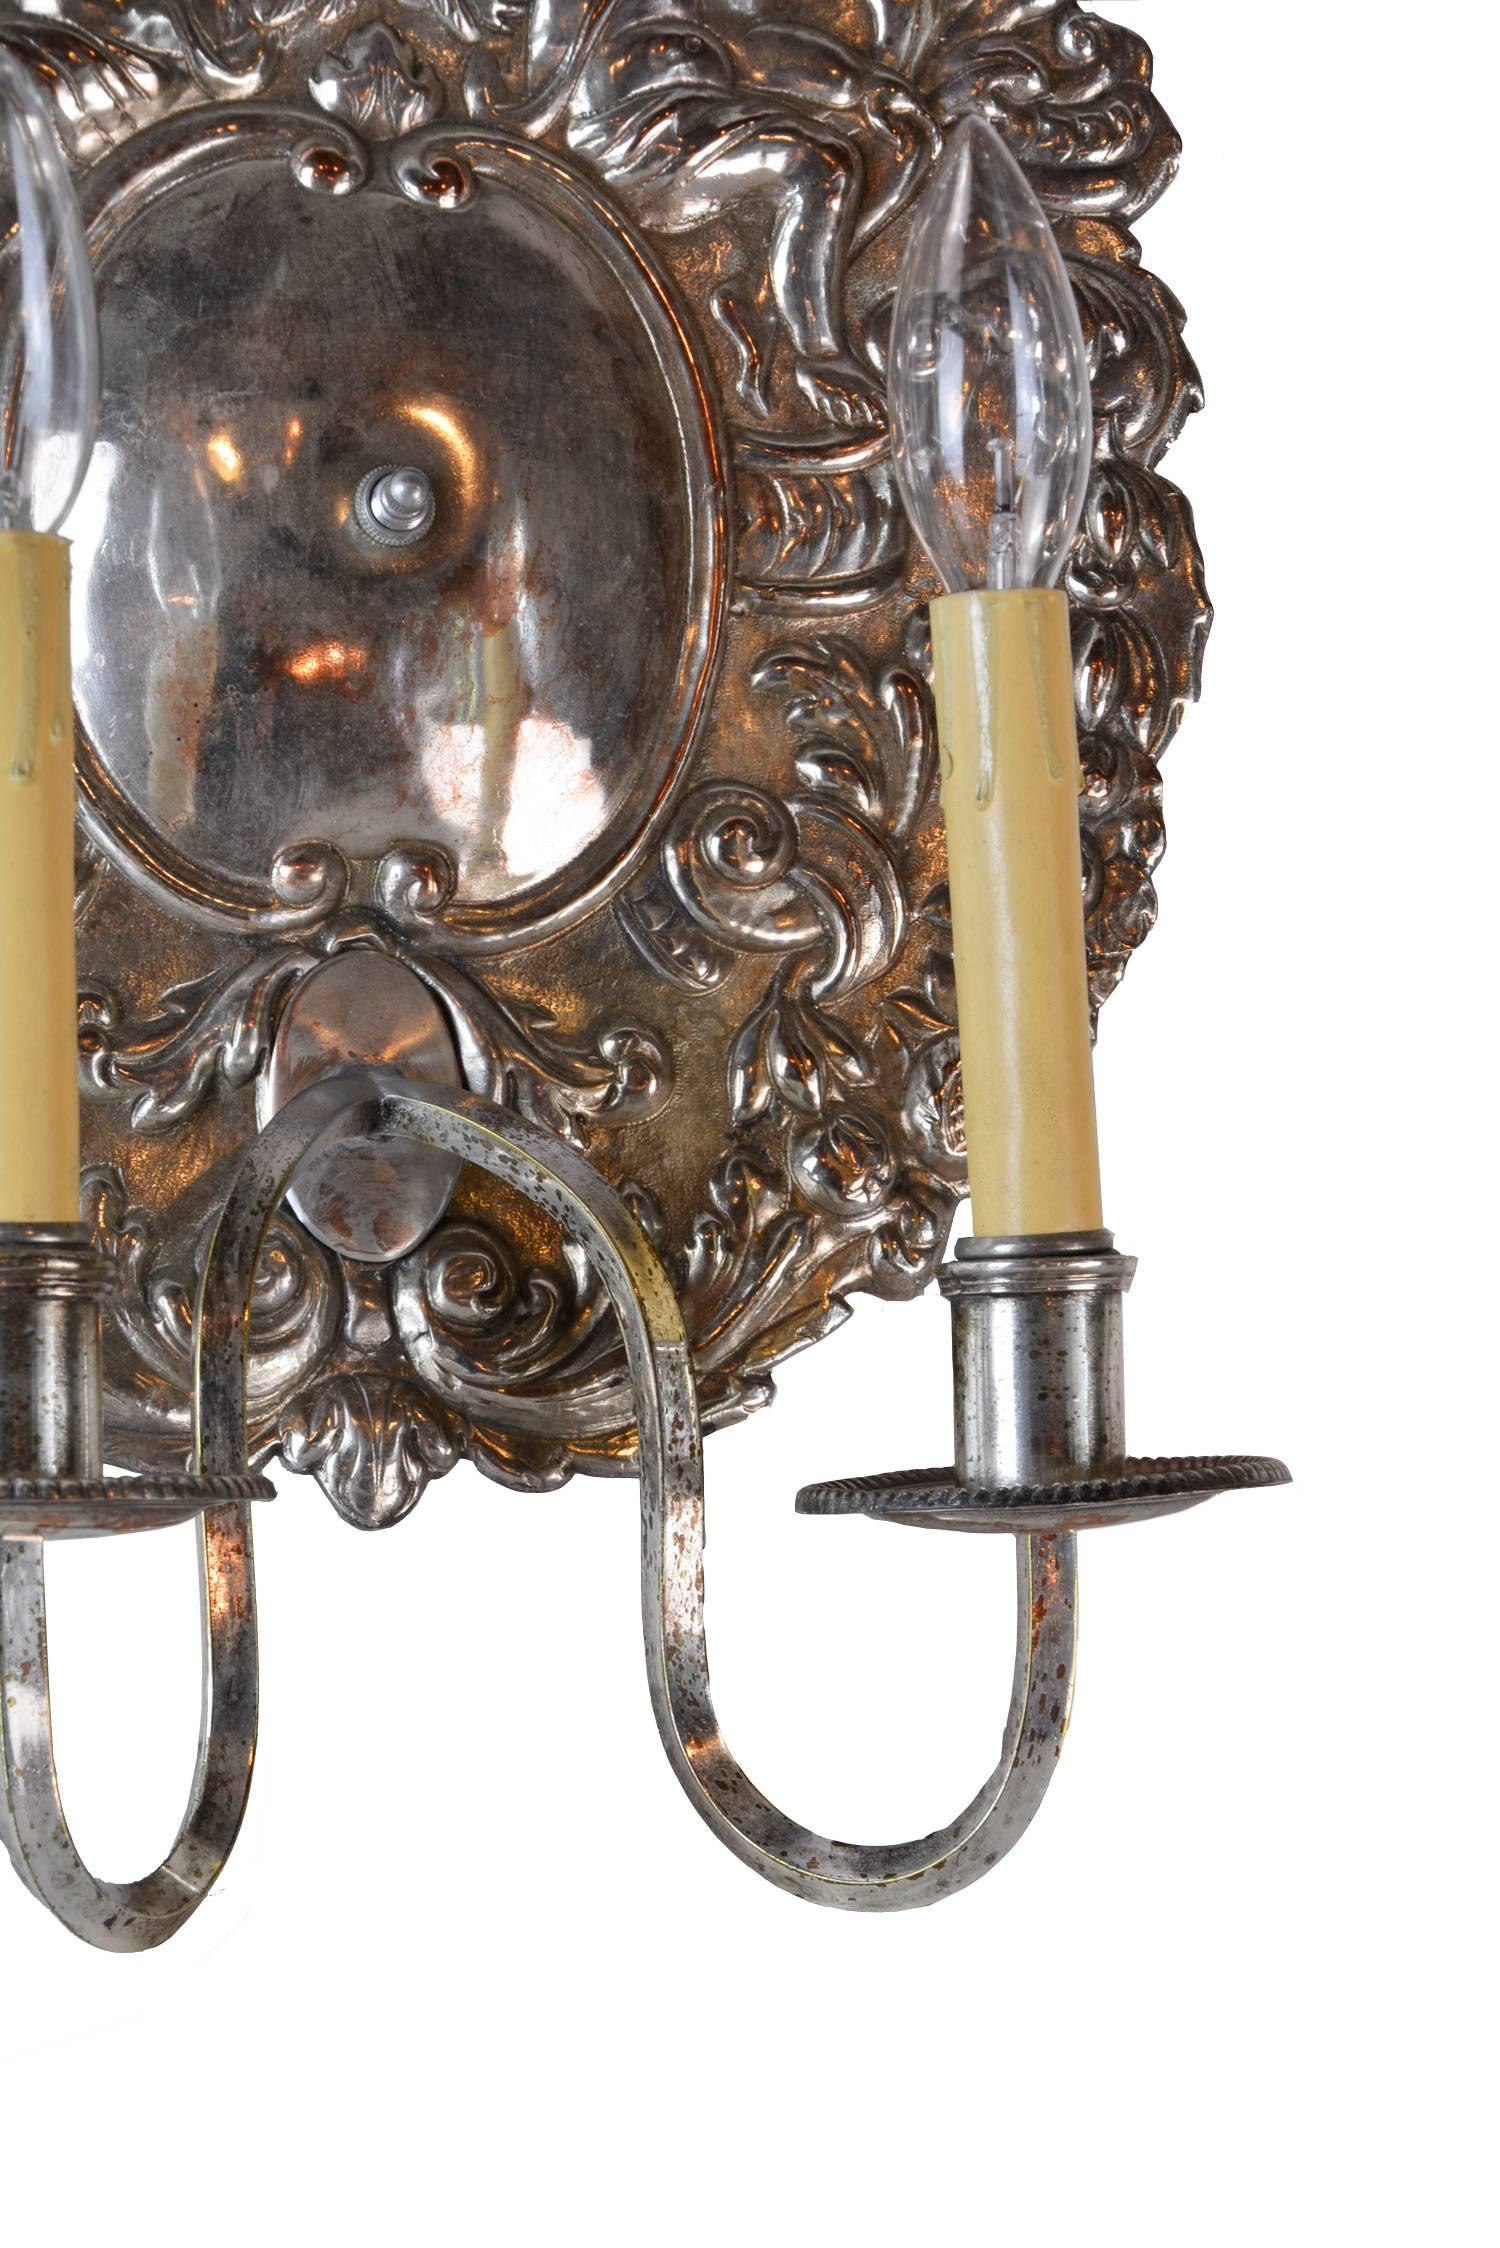 18th Century Early American Silver Sconce Pair with Cherubs For Sale